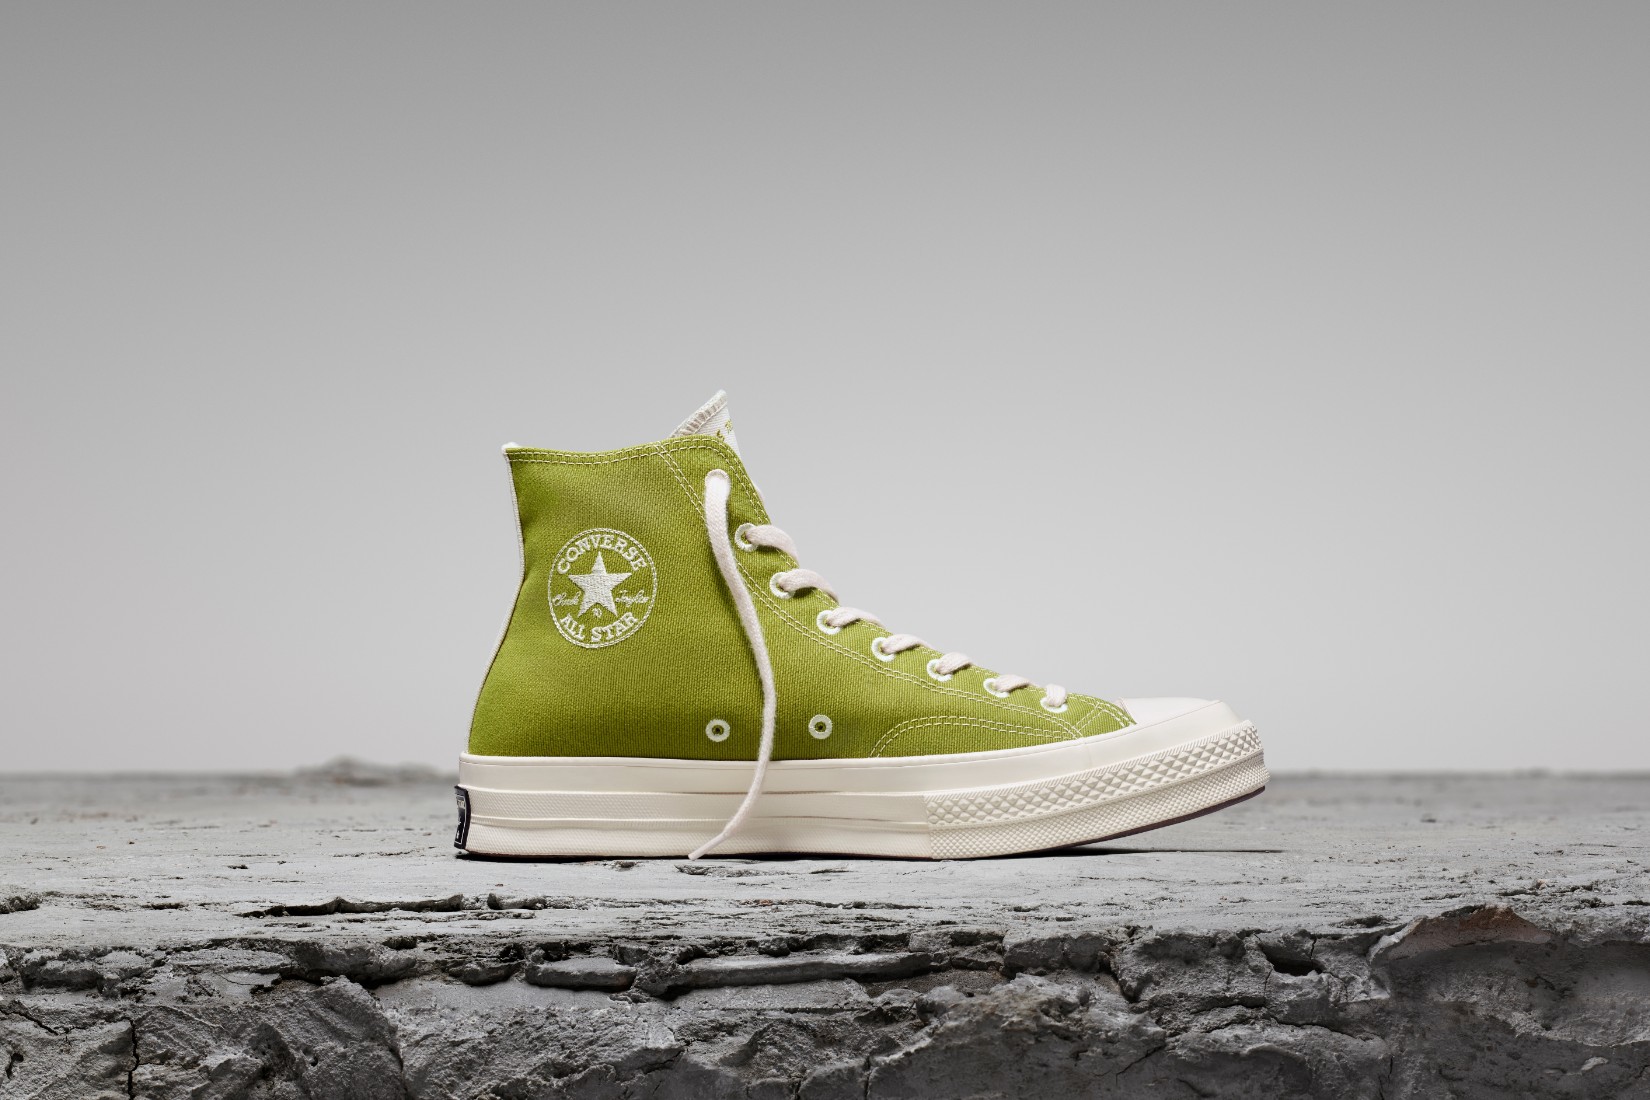 footwear made from recycled materials